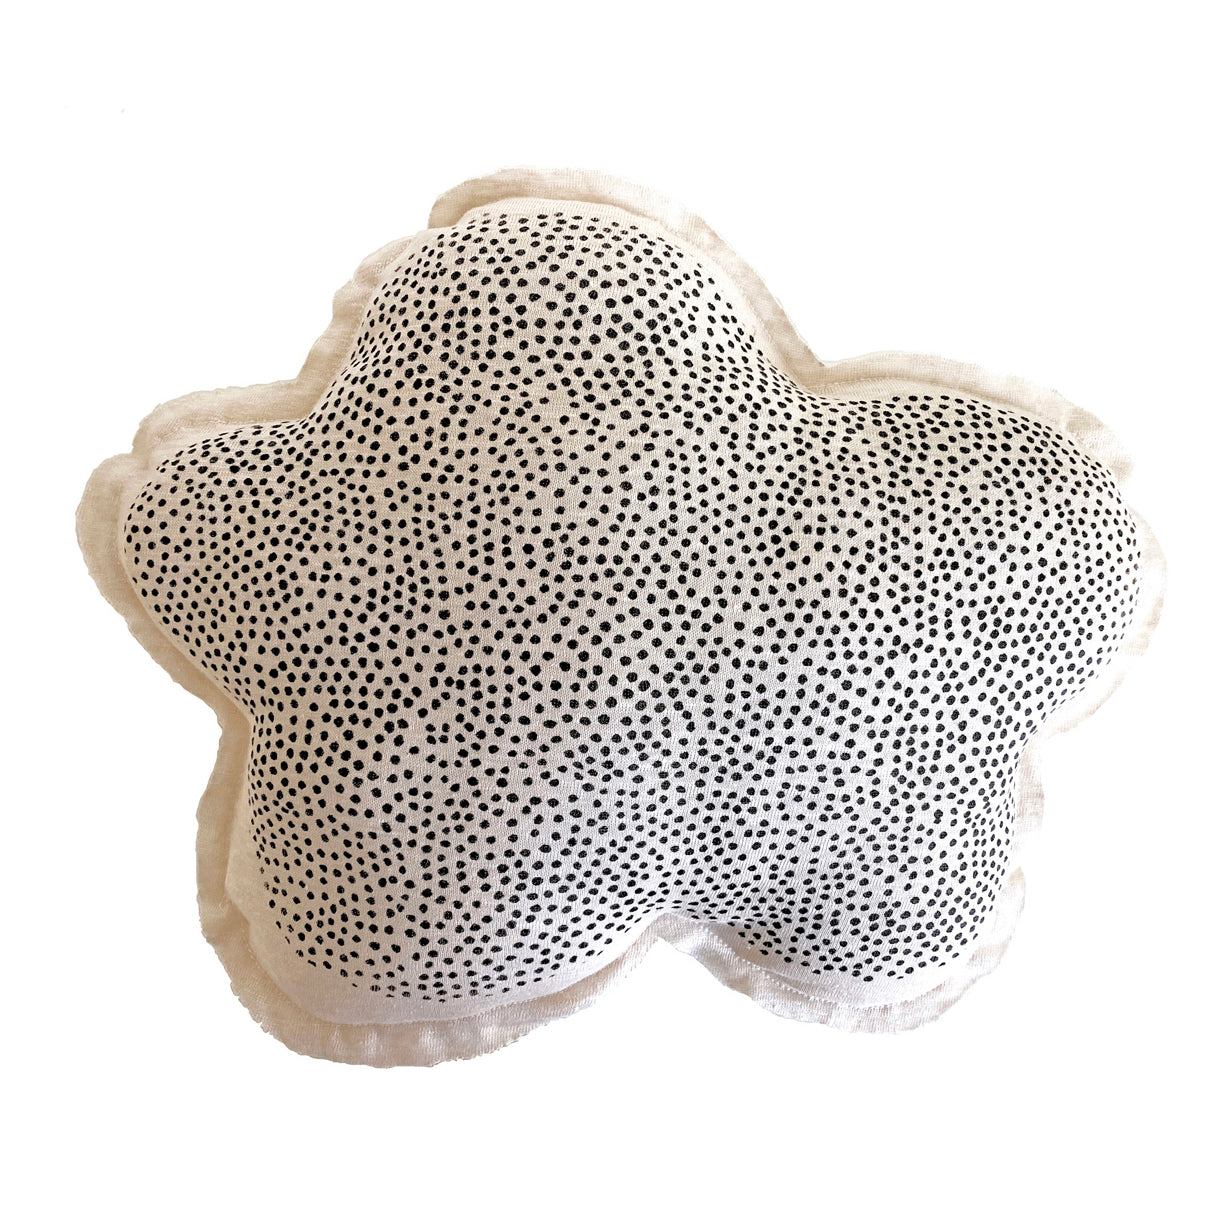 Cloud Shaped Pillow-Speckled Print